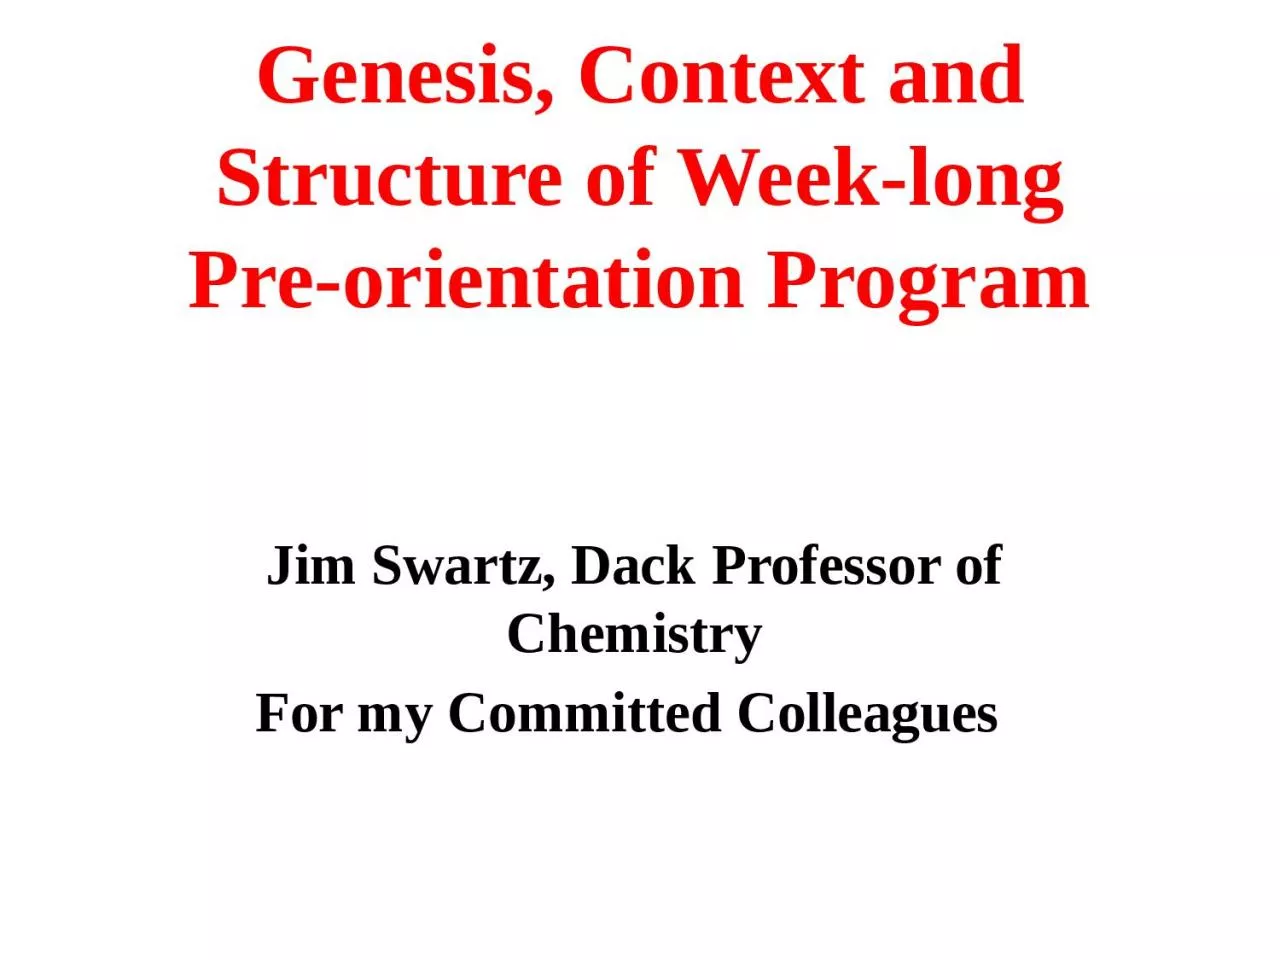 Genesis, Context and Structure of Week-long Pre-orientation Program